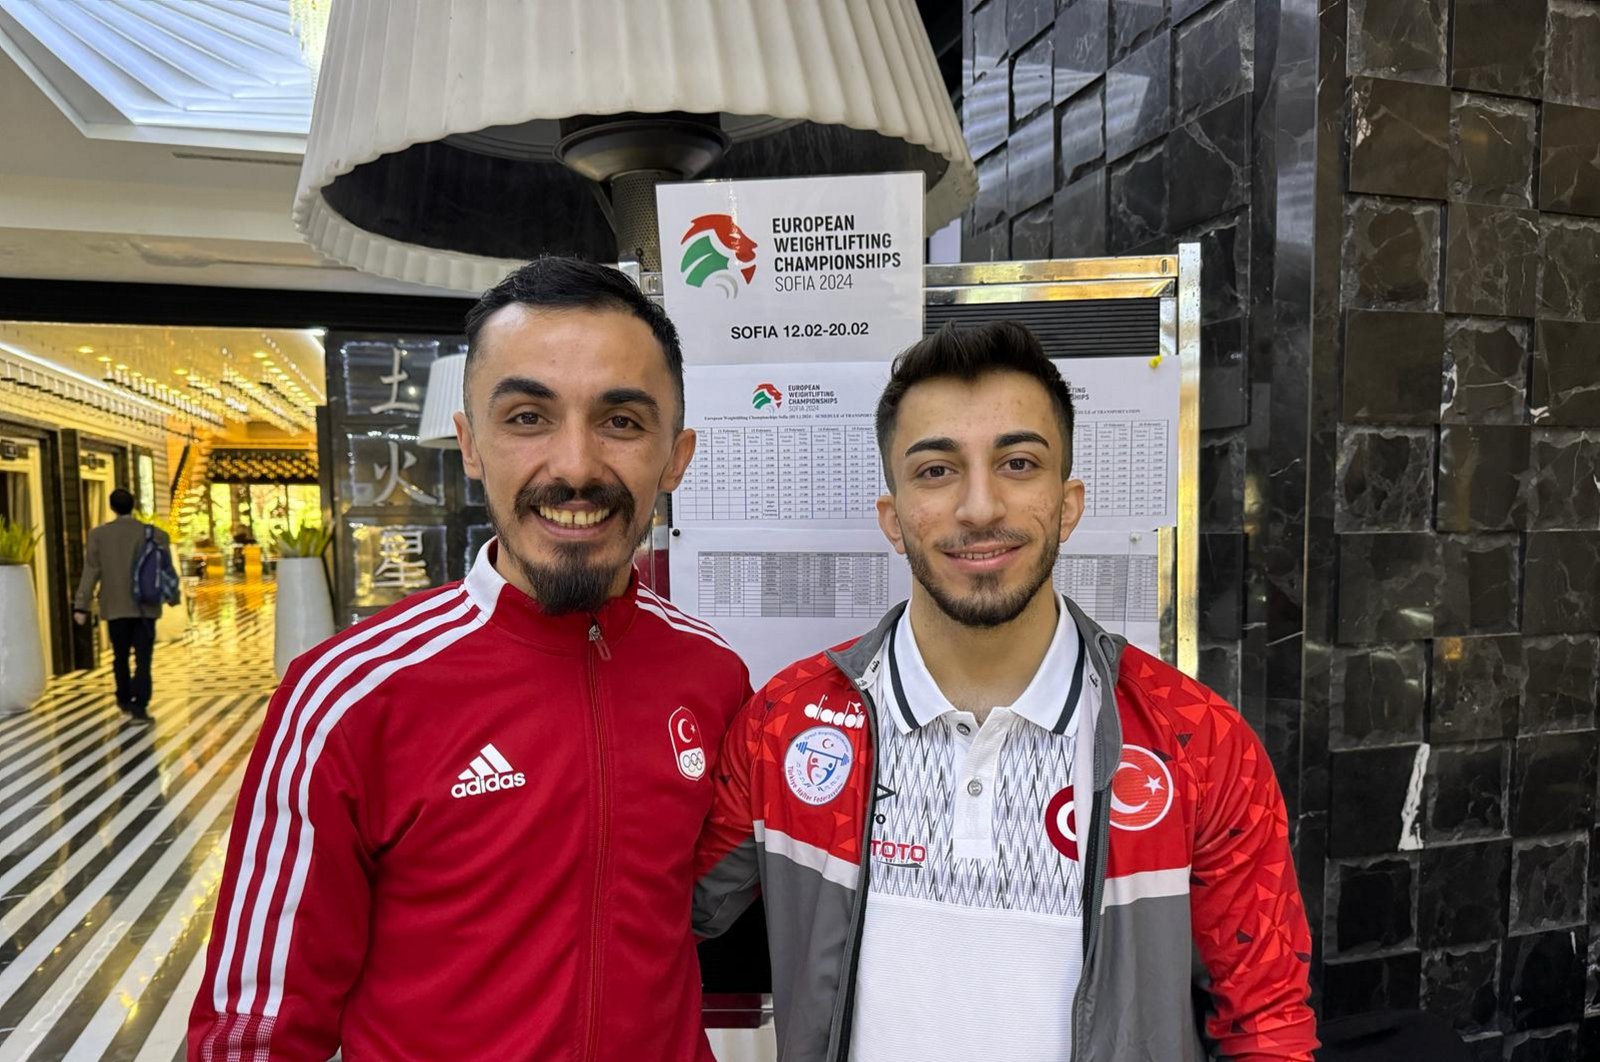 Turkish weightlifters Muammer Şahin (L) and Harun Algül pose for a photo ahead of the European Weightlifting Championship, Sofia, Bulgaria, Feb. 13, 2024. (AA Photo)